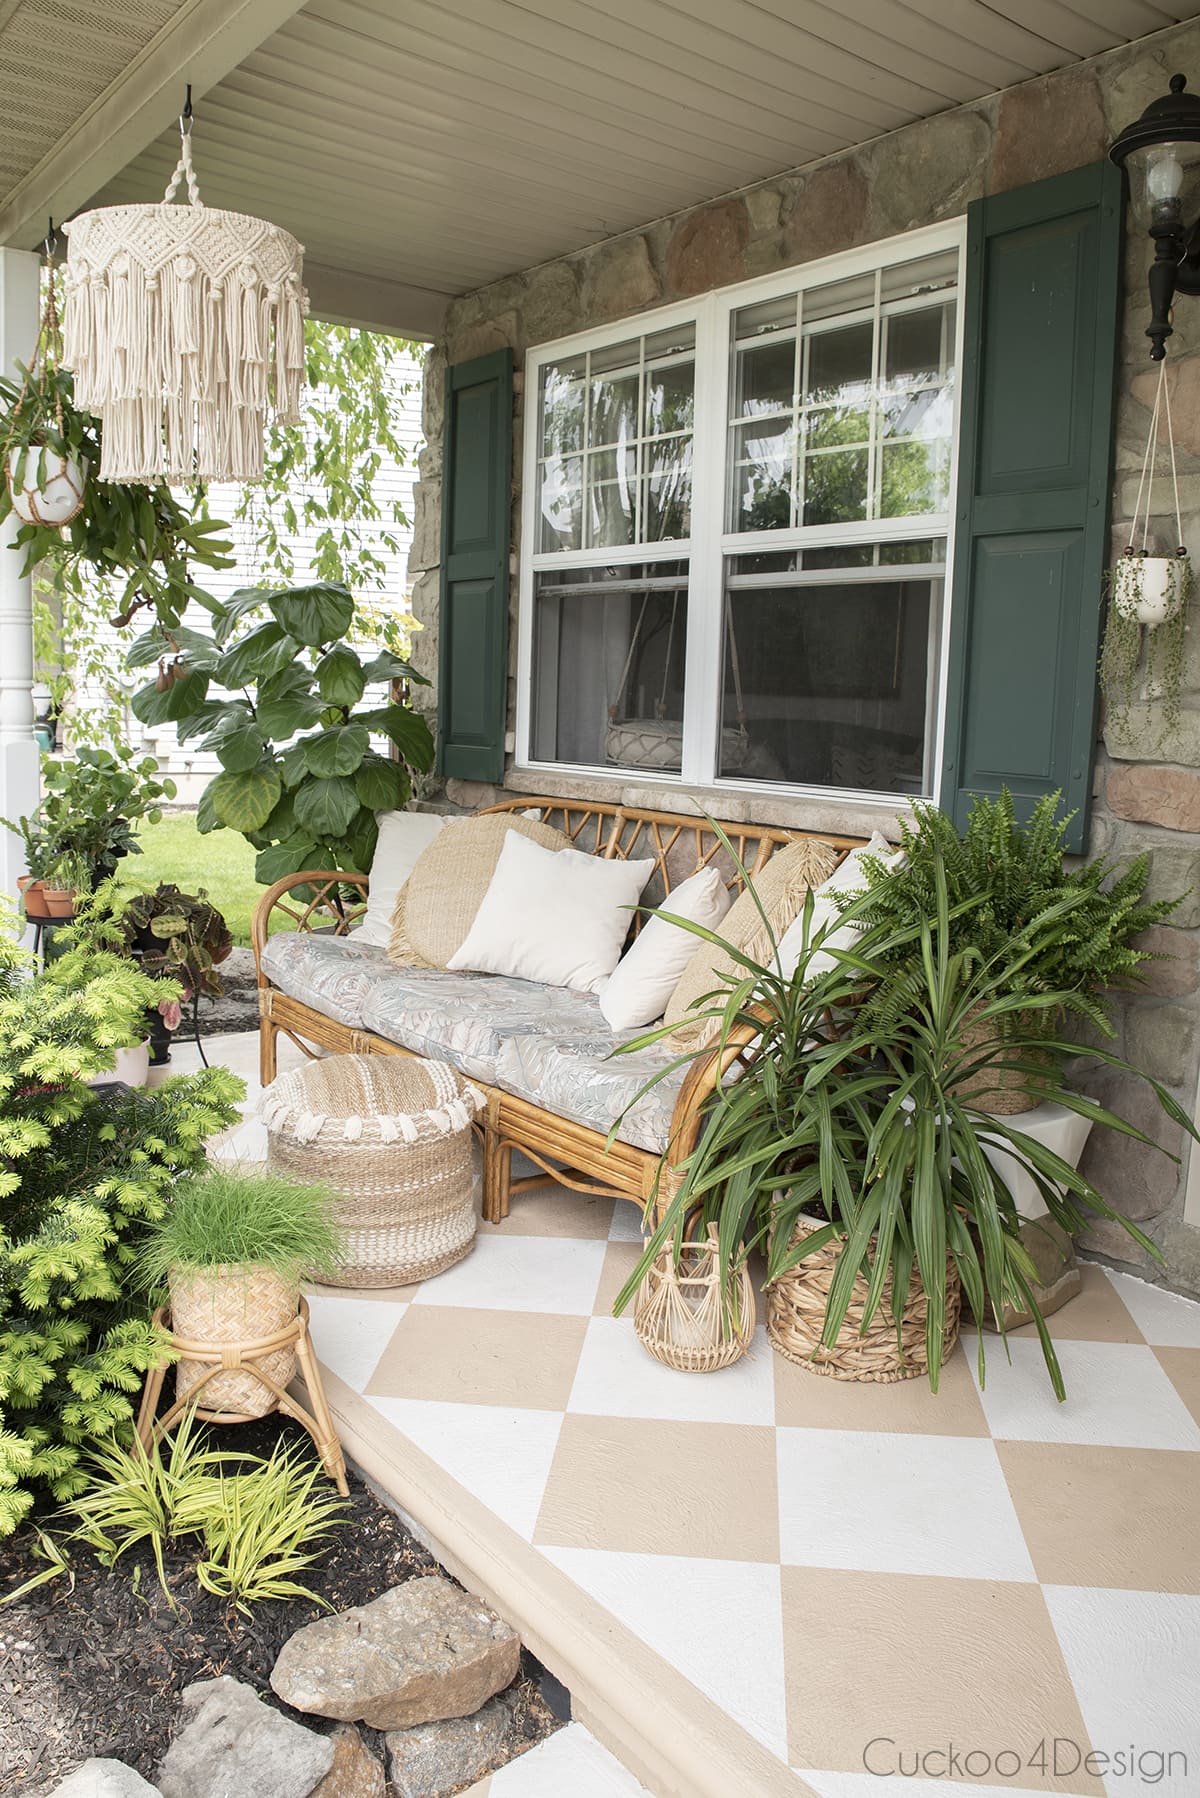 How to repaint a painted concrete porch